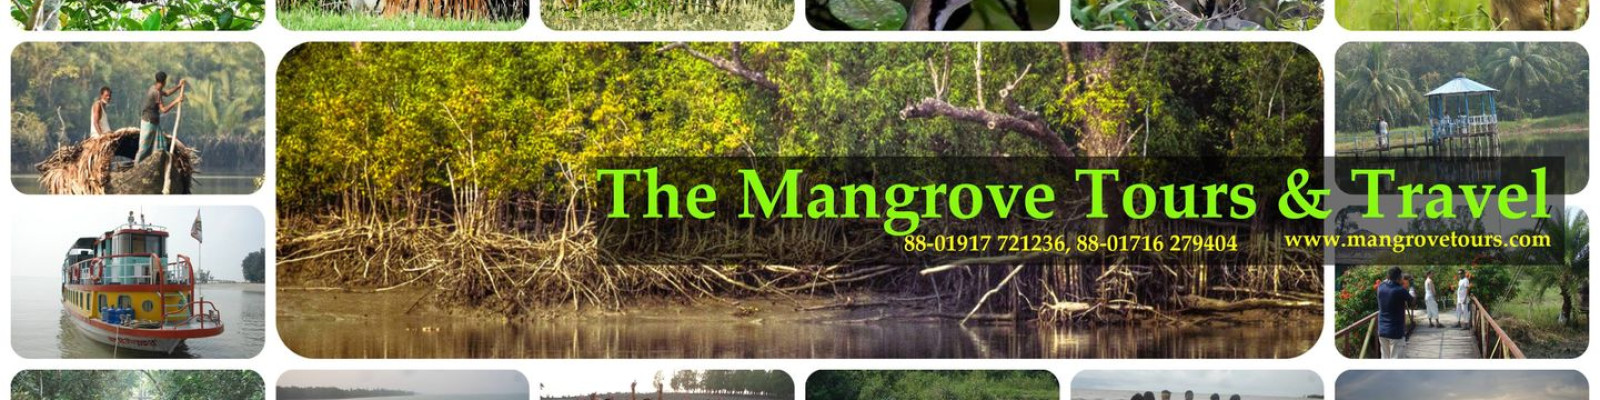 Cover image of The Mangrove Tours & Travel